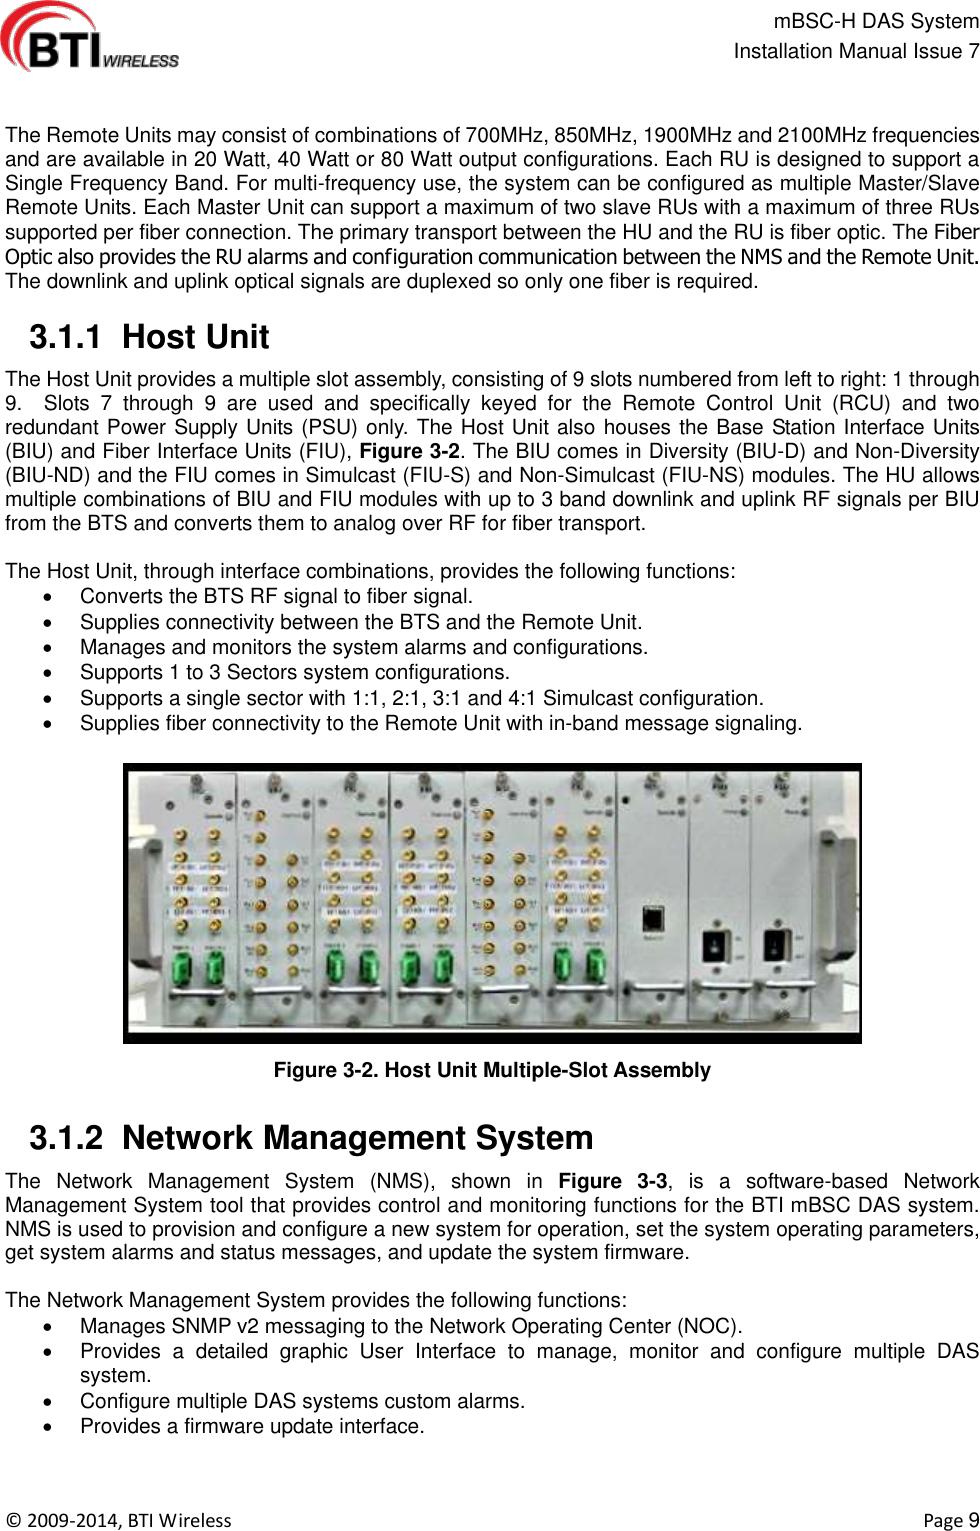                                                   mBSC-H DAS System   Installation Manual Issue 7  ©  2009-2014, BTI Wireless    Page 9   The Remote Units may consist of combinations of 700MHz, 850MHz, 1900MHz and 2100MHz frequencies and are available in 20 Watt, 40 Watt or 80 Watt output configurations. Each RU is designed to support a Single Frequency Band. For multi-frequency use, the system can be configured as multiple Master/Slave Remote Units. Each Master Unit can support a maximum of two slave RUs with a maximum of three RUs supported per fiber connection. The primary transport between the HU and the RU is fiber optic. The Fiber Optic also provides the RU alarms and configuration communication between the NMS and the Remote Unit. The downlink and uplink optical signals are duplexed so only one fiber is required.   3.1.1  Host Unit The Host Unit provides a multiple slot assembly, consisting of 9 slots numbered from left to right: 1 through 9.    Slots  7  through  9  are  used  and  specifically  keyed  for  the  Remote  Control  Unit  (RCU)  and  two redundant Power Supply Units (PSU) only. The Host Unit also houses the Base Station Interface Units (BIU) and Fiber Interface Units (FIU), Figure 3-2. The BIU comes in Diversity (BIU-D) and Non-Diversity (BIU-ND) and the FIU comes in Simulcast (FIU-S) and Non-Simulcast (FIU-NS) modules. The HU allows multiple combinations of BIU and FIU modules with up to 3 band downlink and uplink RF signals per BIU from the BTS and converts them to analog over RF for fiber transport.    The Host Unit, through interface combinations, provides the following functions:   Converts the BTS RF signal to fiber signal.   Supplies connectivity between the BTS and the Remote Unit.   Manages and monitors the system alarms and configurations.   Supports 1 to 3 Sectors system configurations.   Supports a single sector with 1:1, 2:1, 3:1 and 4:1 Simulcast configuration.   Supplies fiber connectivity to the Remote Unit with in-band message signaling.  Figure 3-2. Host Unit Multiple-Slot Assembly   3.1.2  Network Management System The  Network  Management  System  (NMS),  shown  in  Figure  3-3,  is  a  software-based  Network Management System tool that provides control and monitoring functions for the BTI mBSC DAS system. NMS is used to provision and configure a new system for operation, set the system operating parameters, get system alarms and status messages, and update the system firmware.  The Network Management System provides the following functions:   Manages SNMP v2 messaging to the Network Operating Center (NOC).   Provides  a  detailed  graphic  User  Interface  to  manage,  monitor  and  configure  multiple  DAS system.   Configure multiple DAS systems custom alarms.   Provides a firmware update interface.  